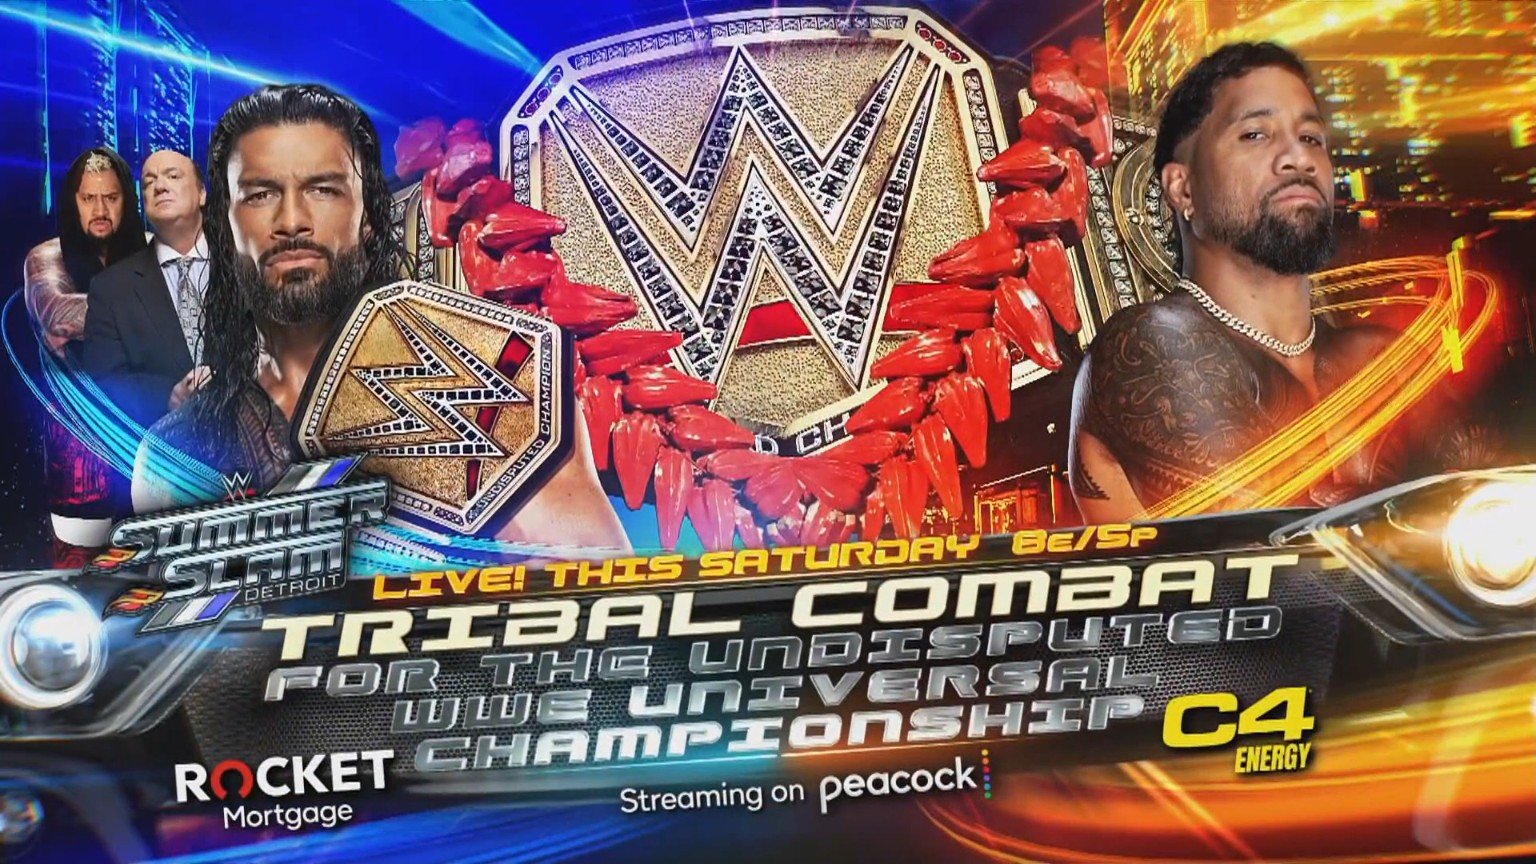 A WWE SummerSlam match graphic featuring WWE Undisputed Universal Champion Roman Reigns vs. Jey Uso.